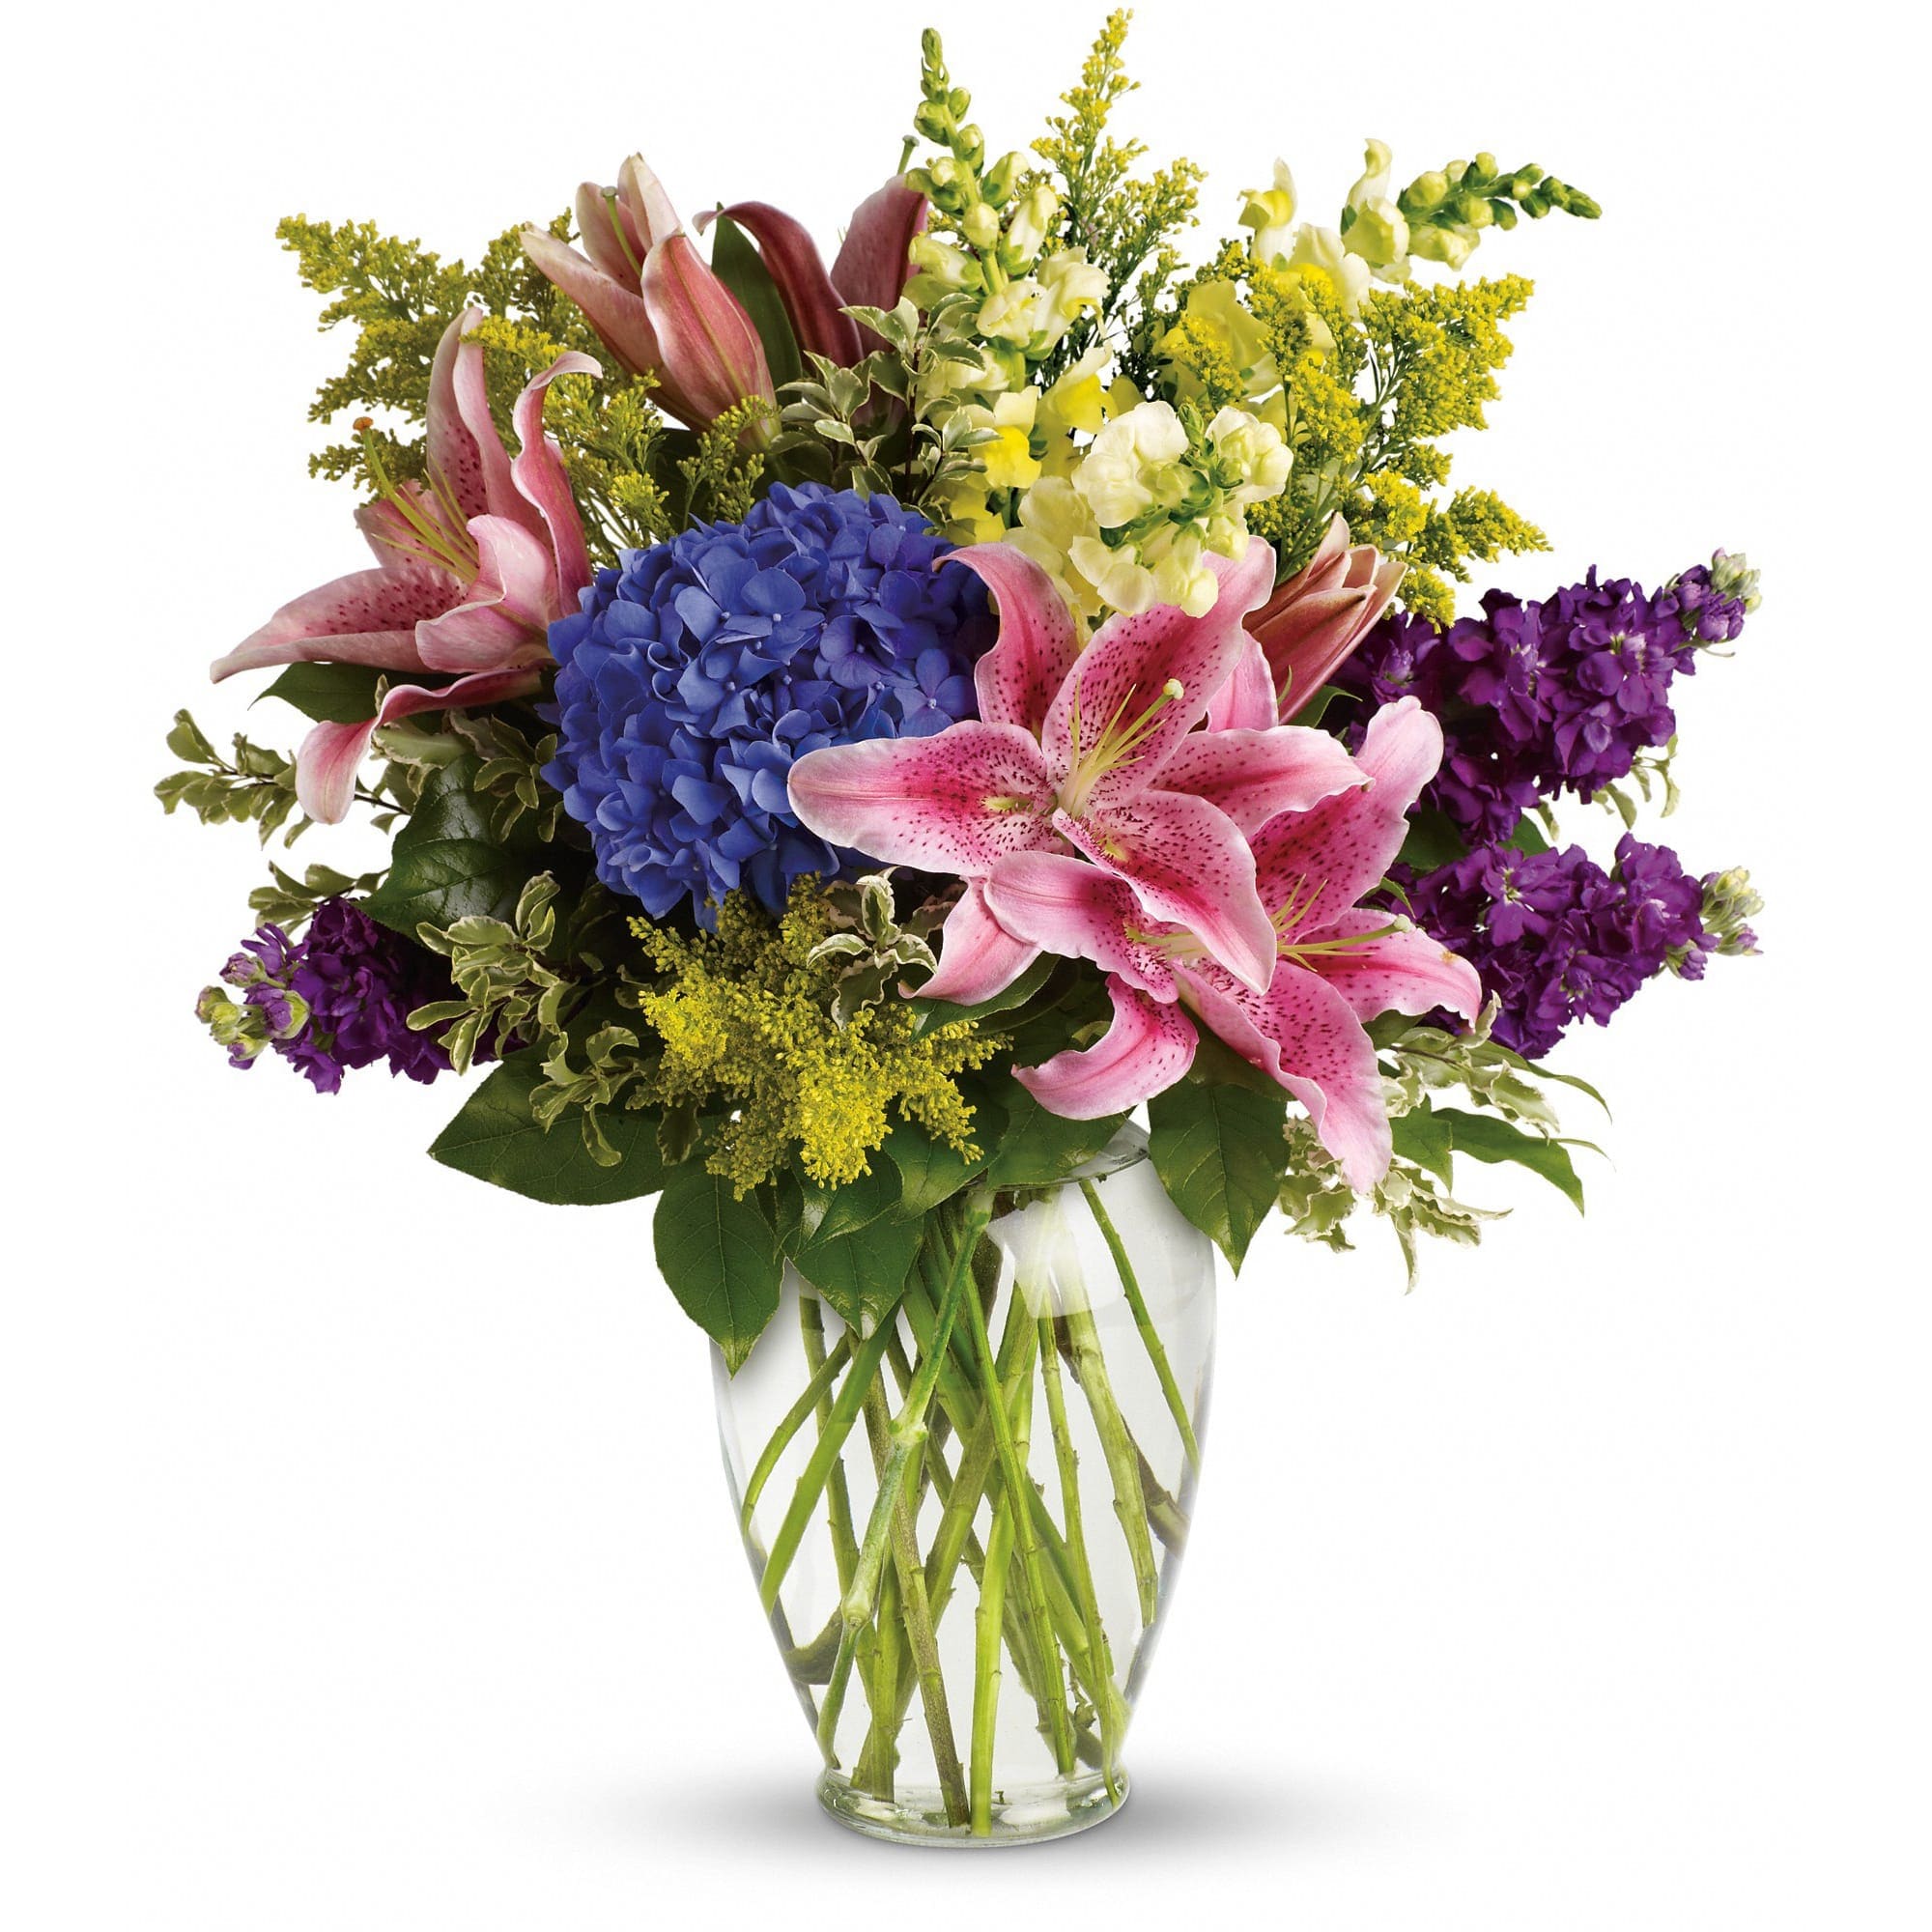 Love Everlasting Bouquet  - Let the family at home know you are thinking of them with this lovely bouquet of pink lilies, blue hydrangea and other floral favorites. It will mean a lot. 